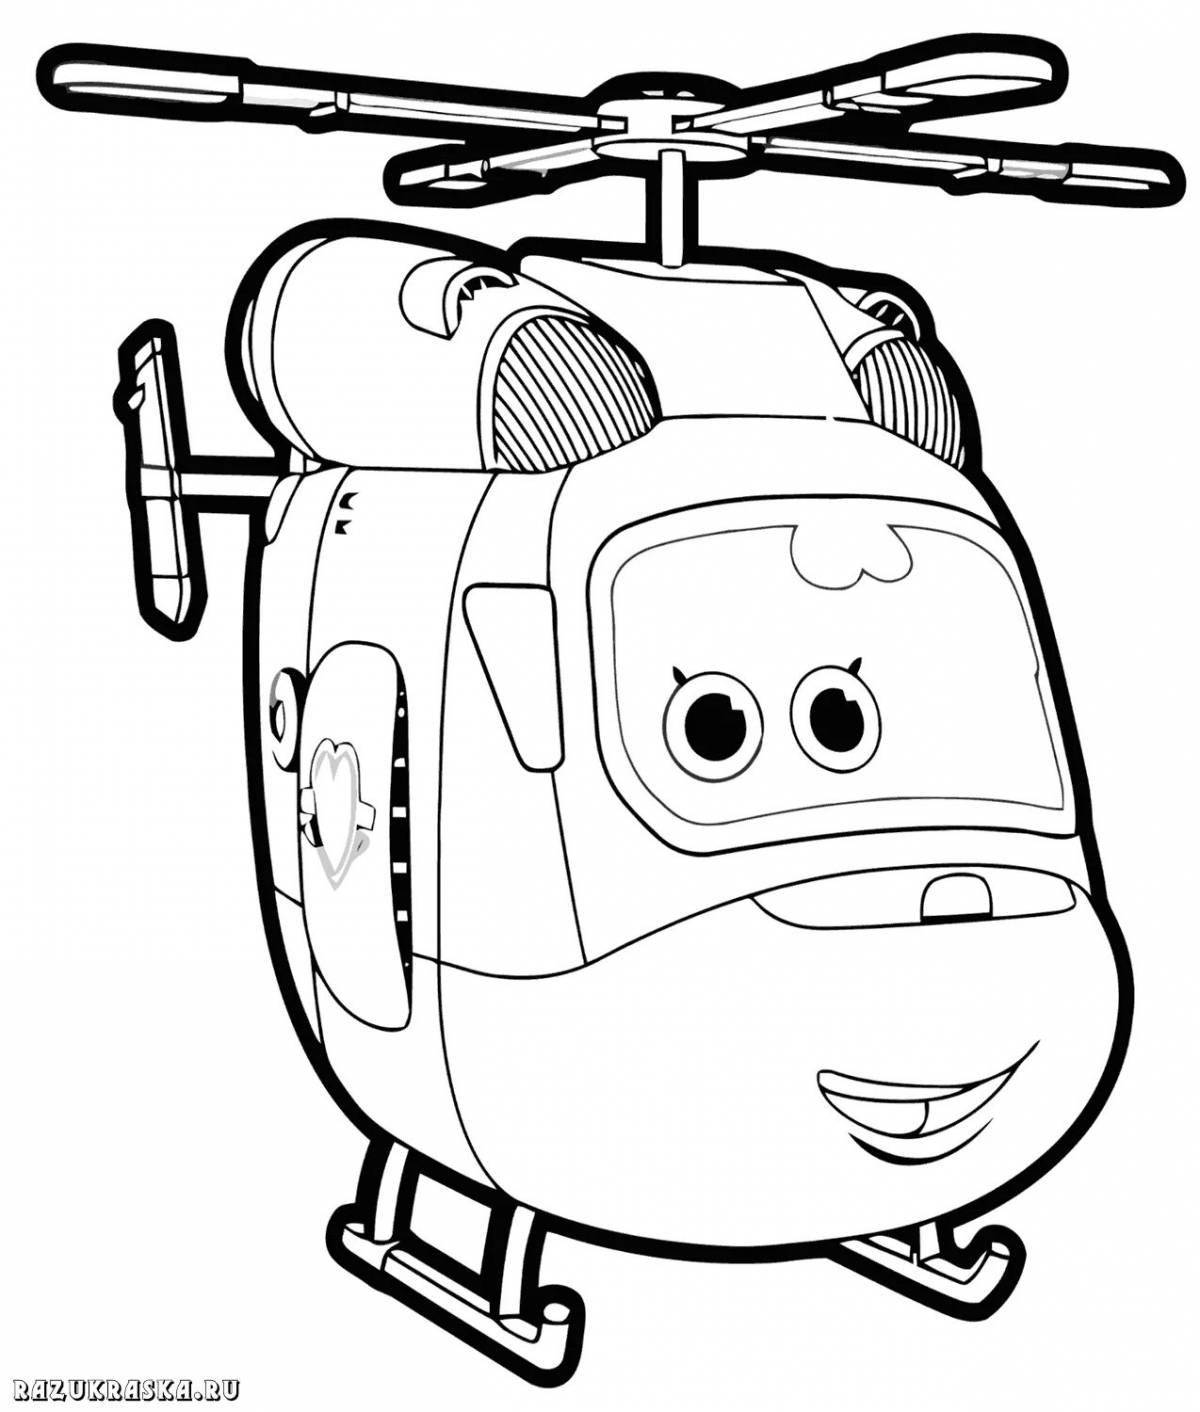 Coloring page elegant ray and fire patrol